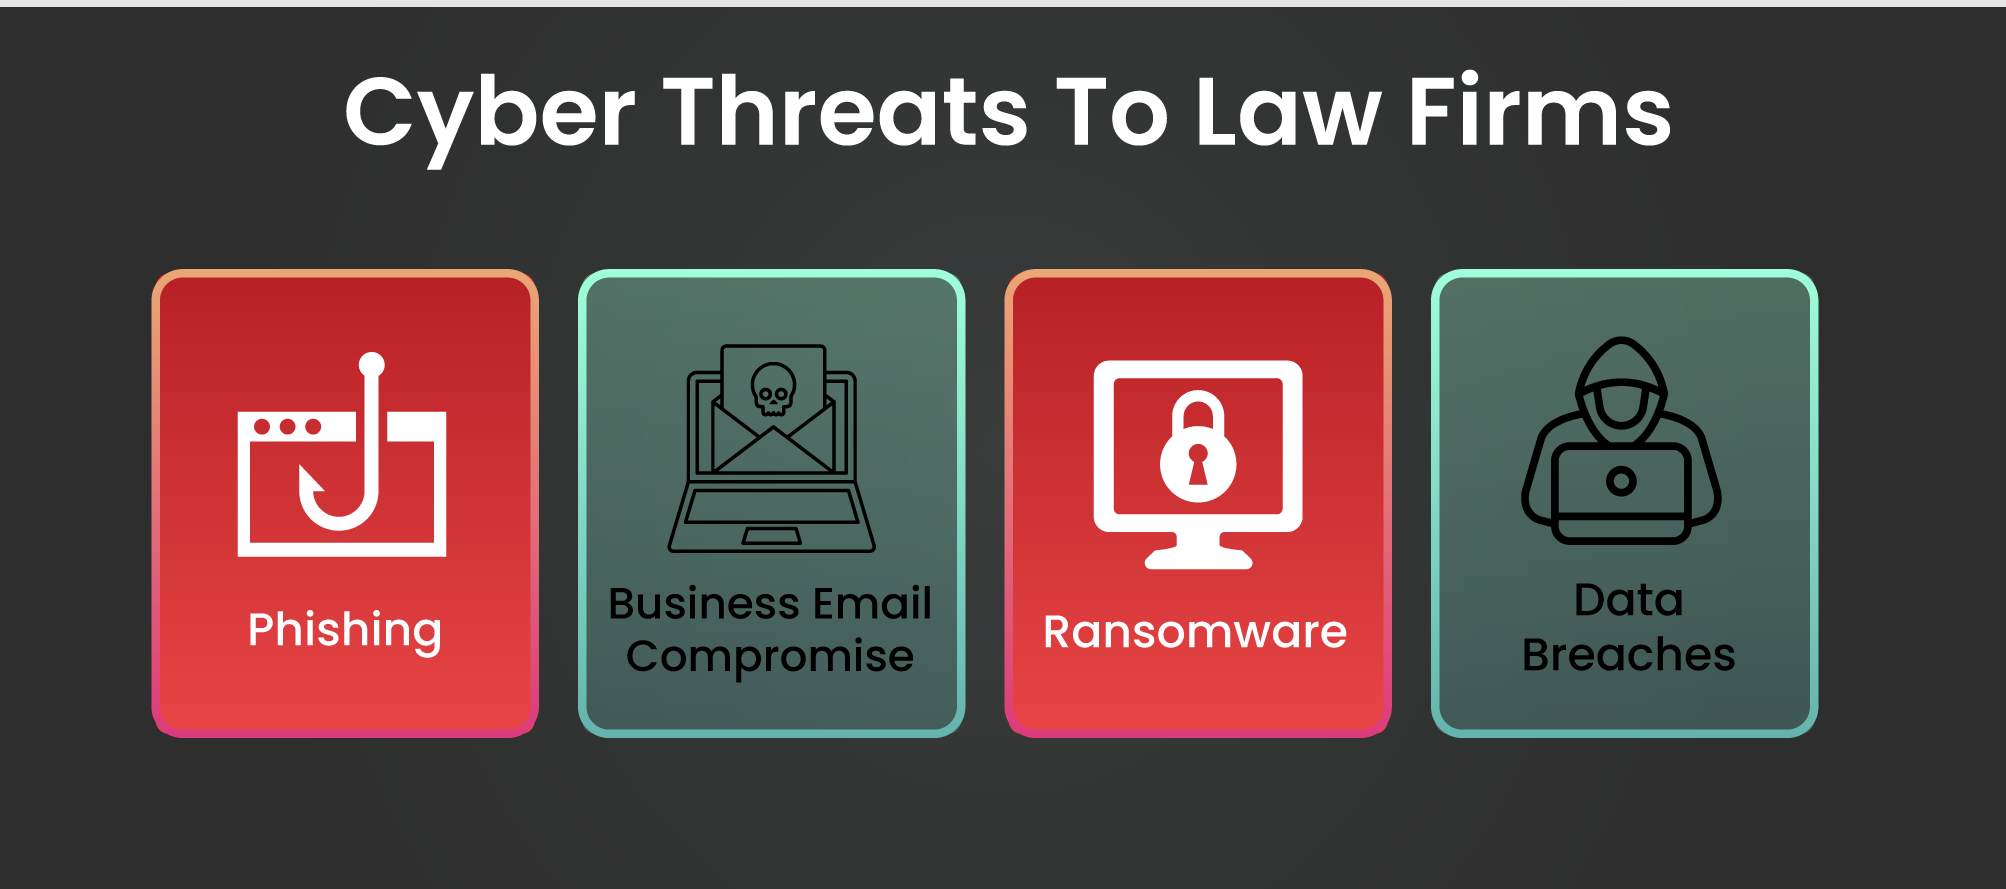 Cyber Threats To Law Firms